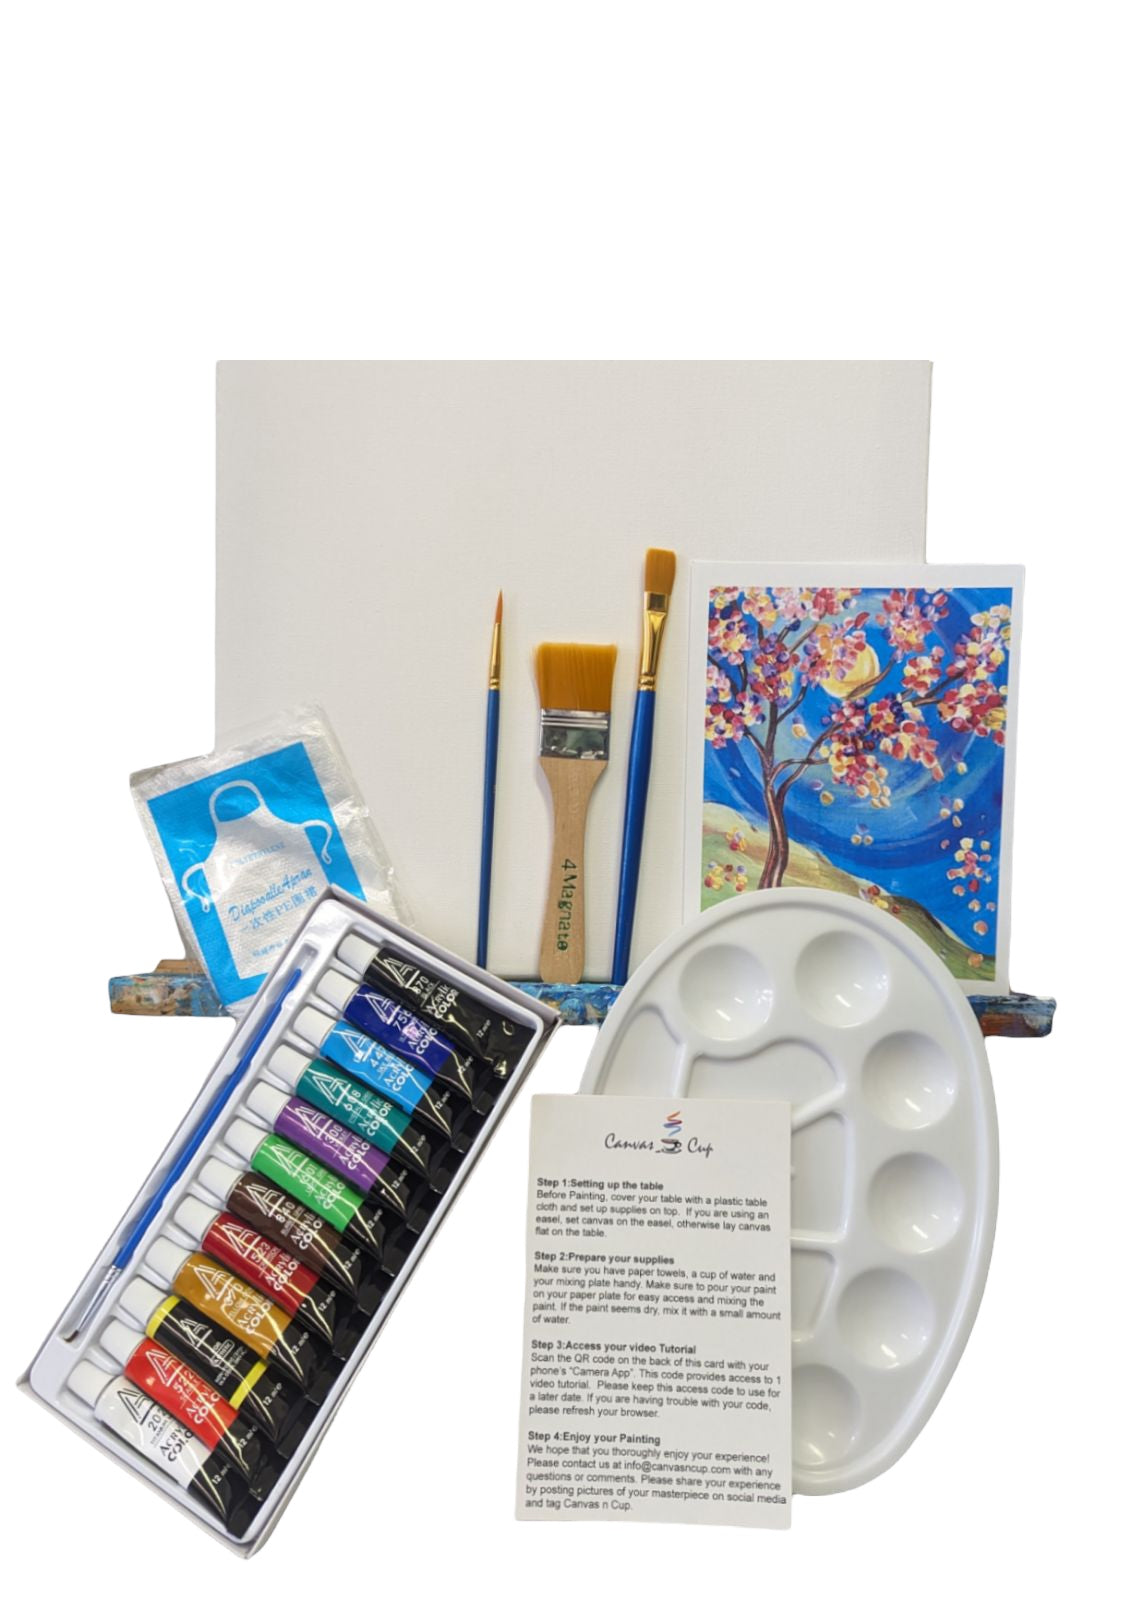 Colors of Love at home Painting Kit & Video Tutorial